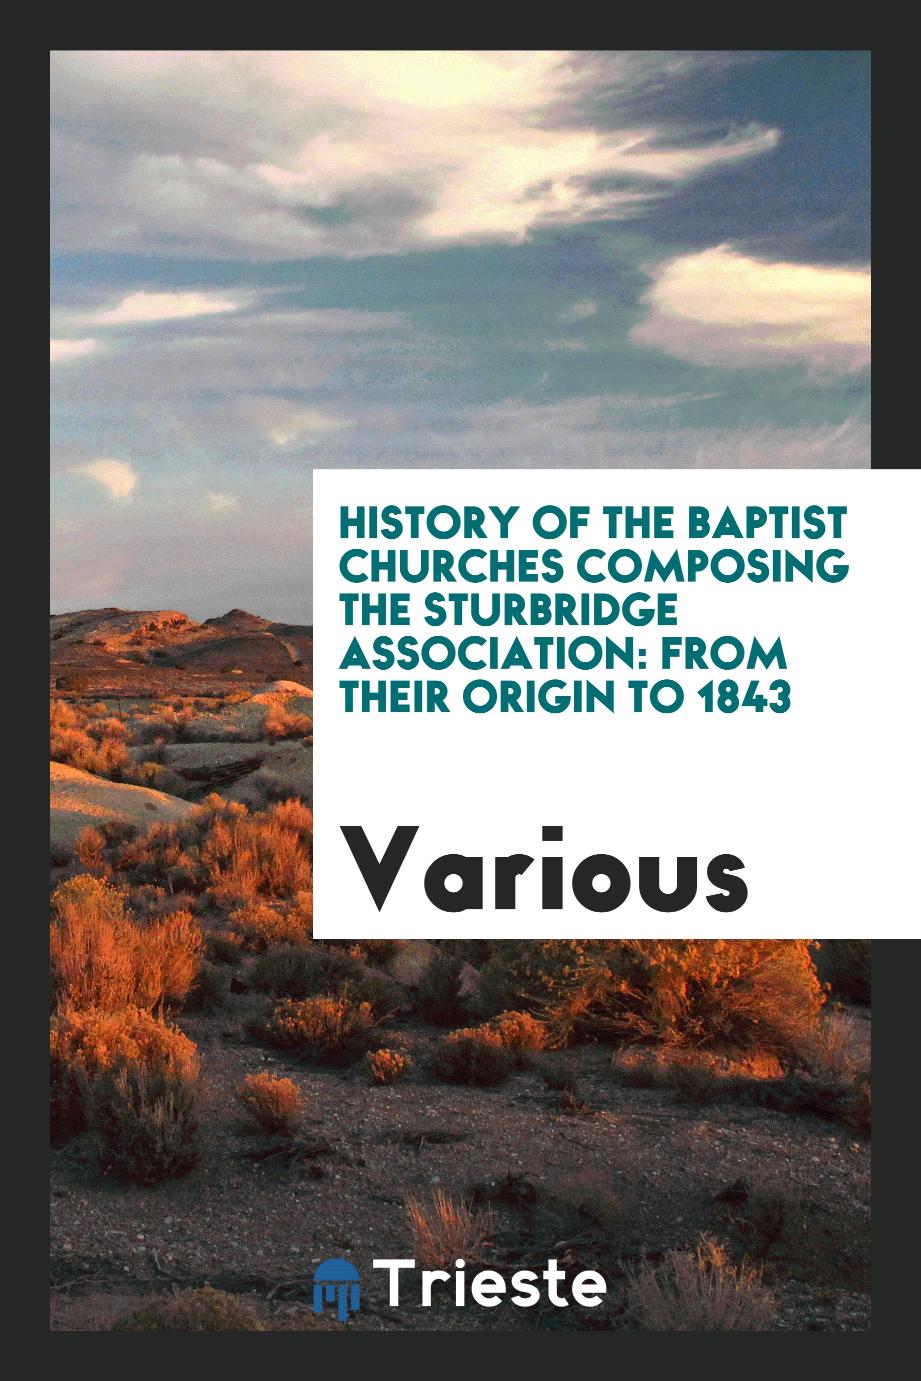 History of the Baptist Churches Composing the Sturbridge Association: From Their Origin to 1843